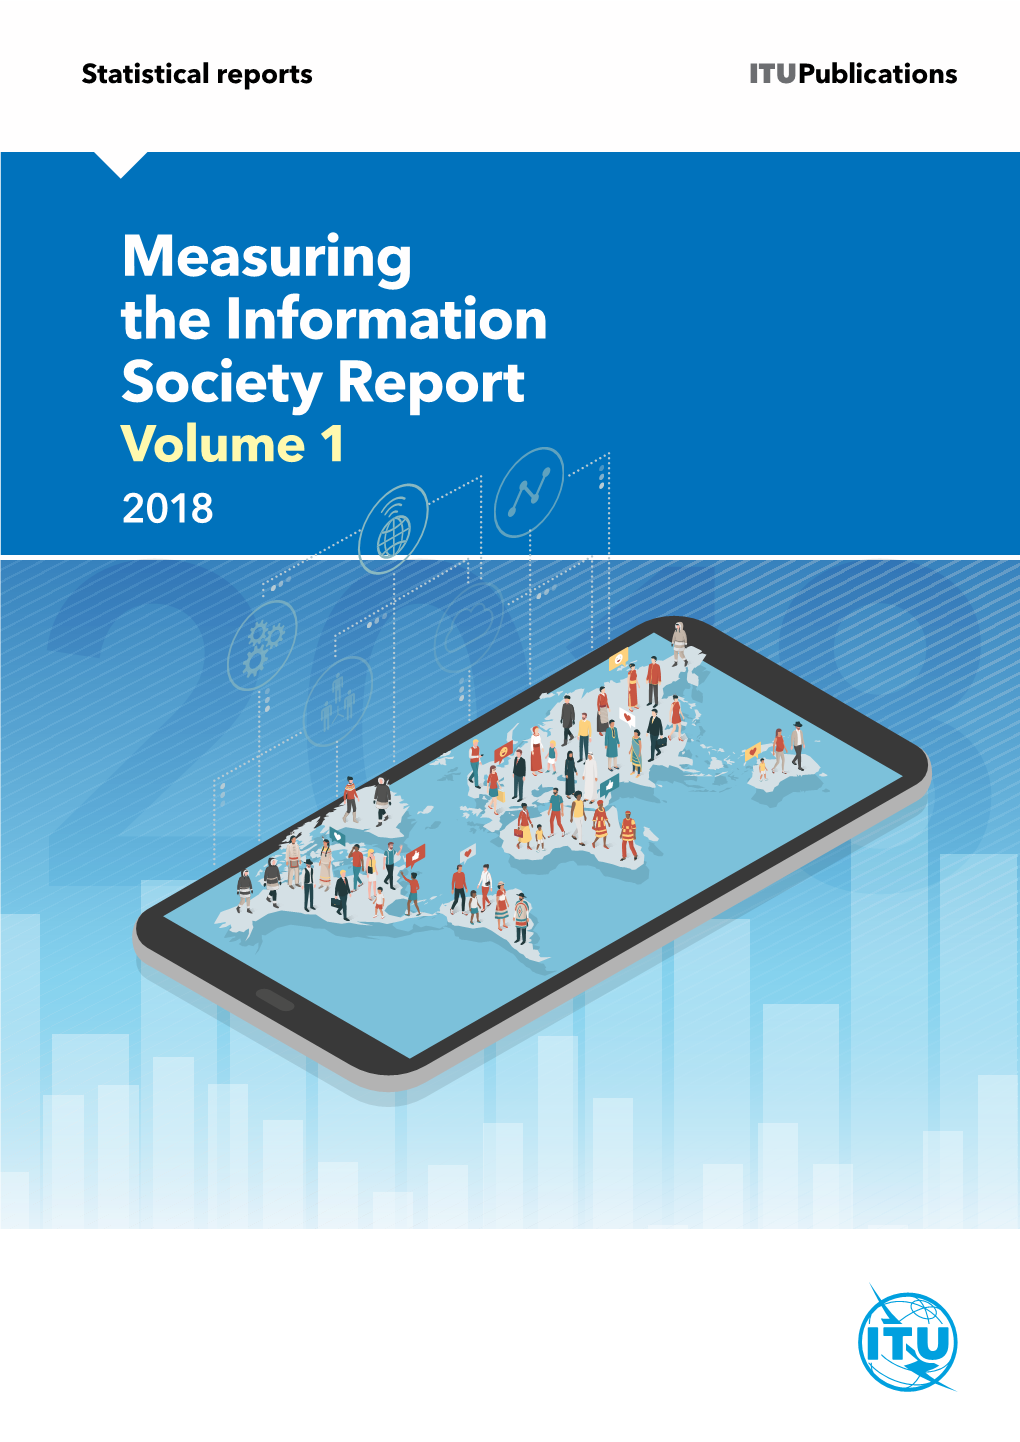 Measuring the Information Society Report Volume 1 2018